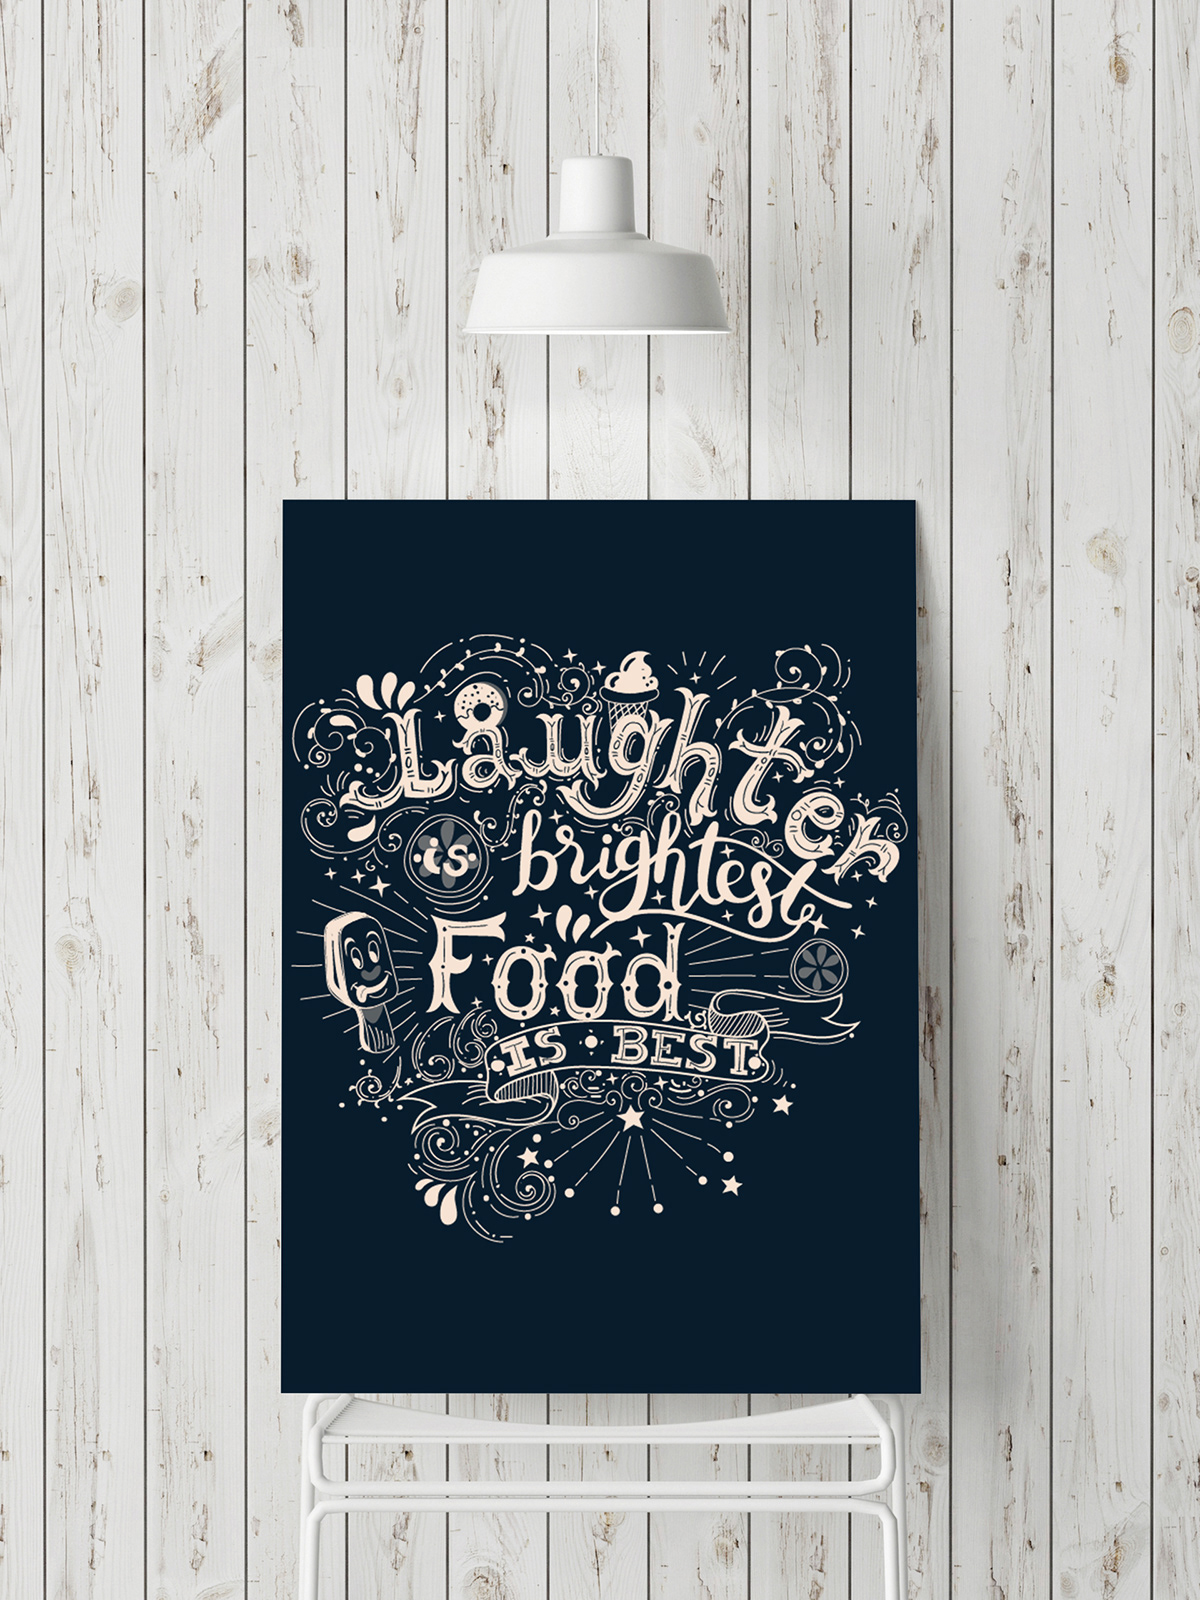 Food  lettering thoughts Quotes posters cafe Interior wallart